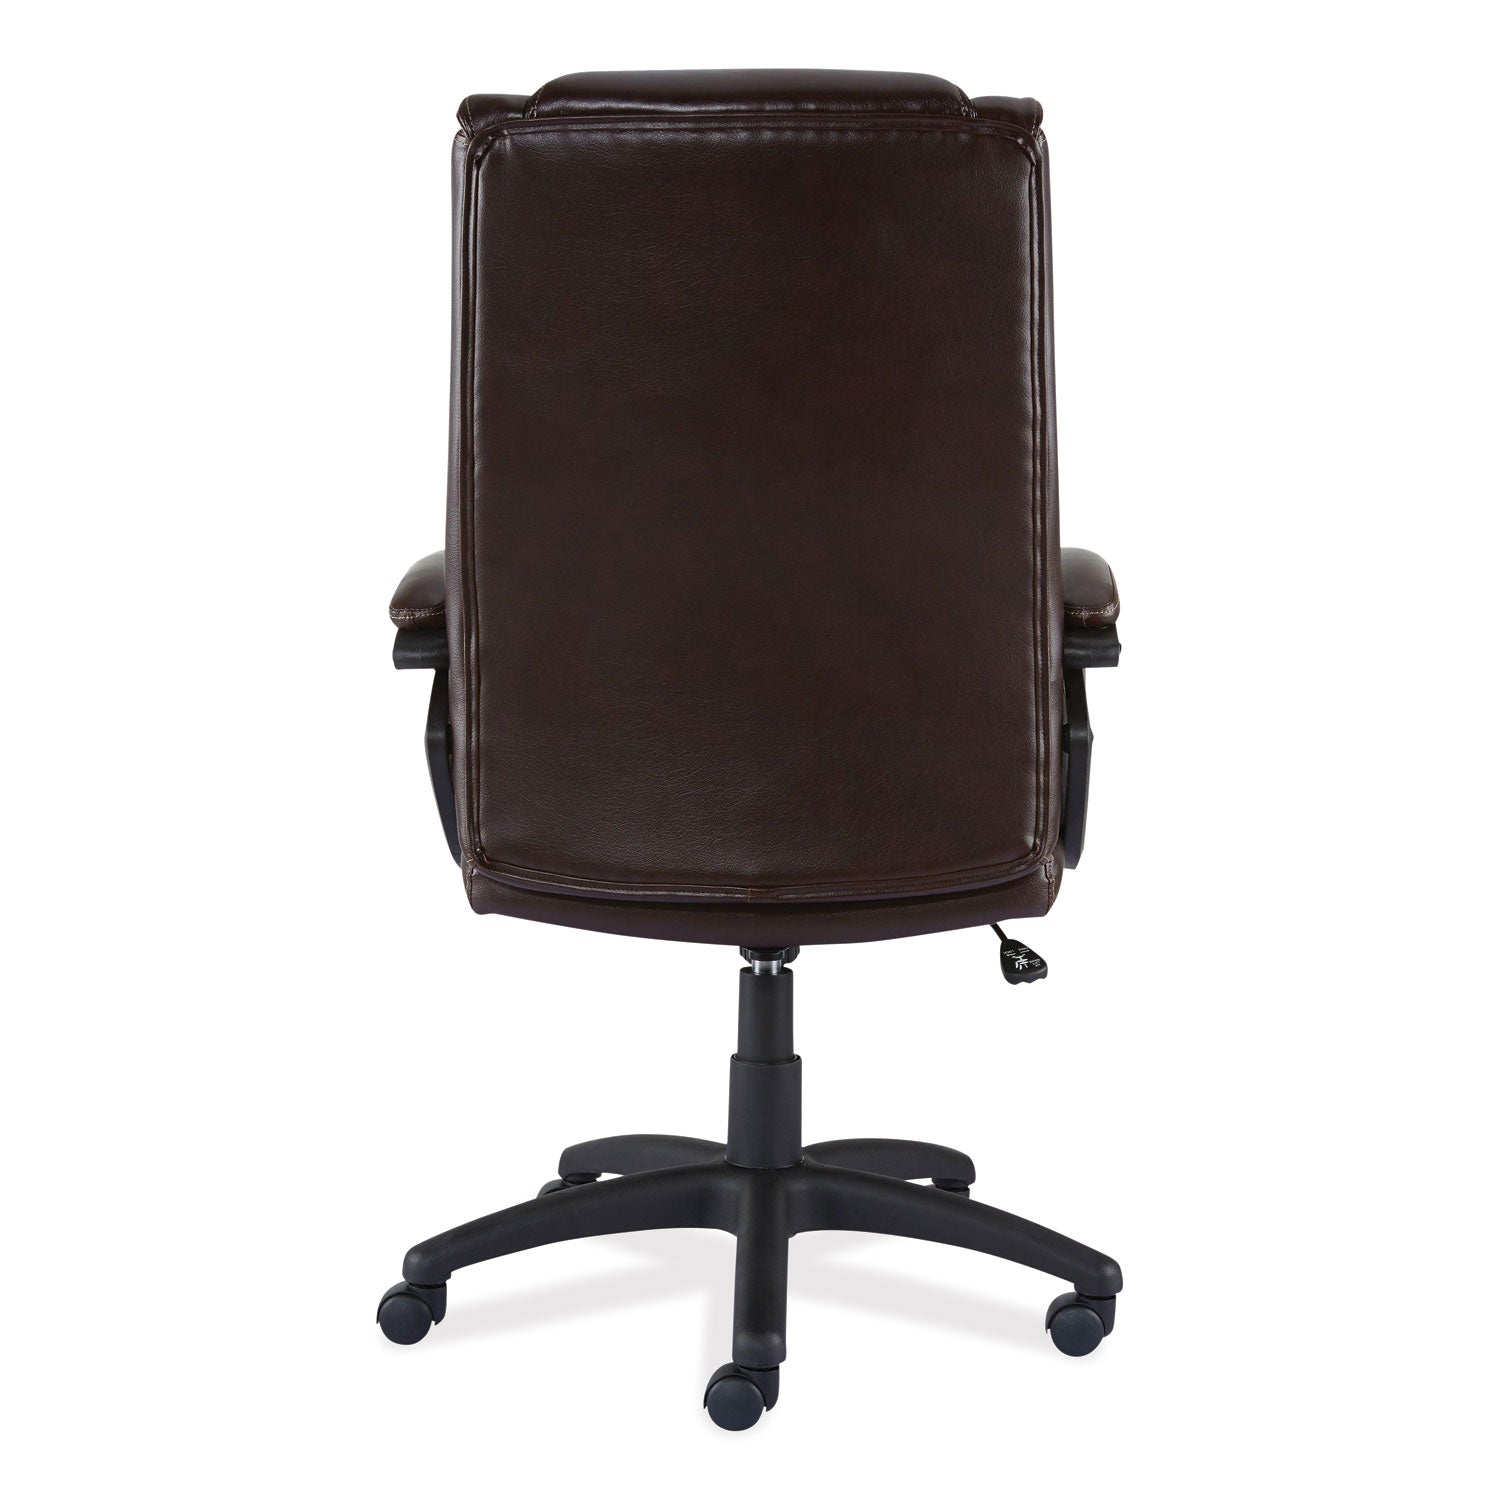 alera-brosna-series-mid-back-task-chair-supports-up-to-250-lb-1815-to-2177-seat-height-brown-seat-back-brown-base_alebrn42b59 - 3